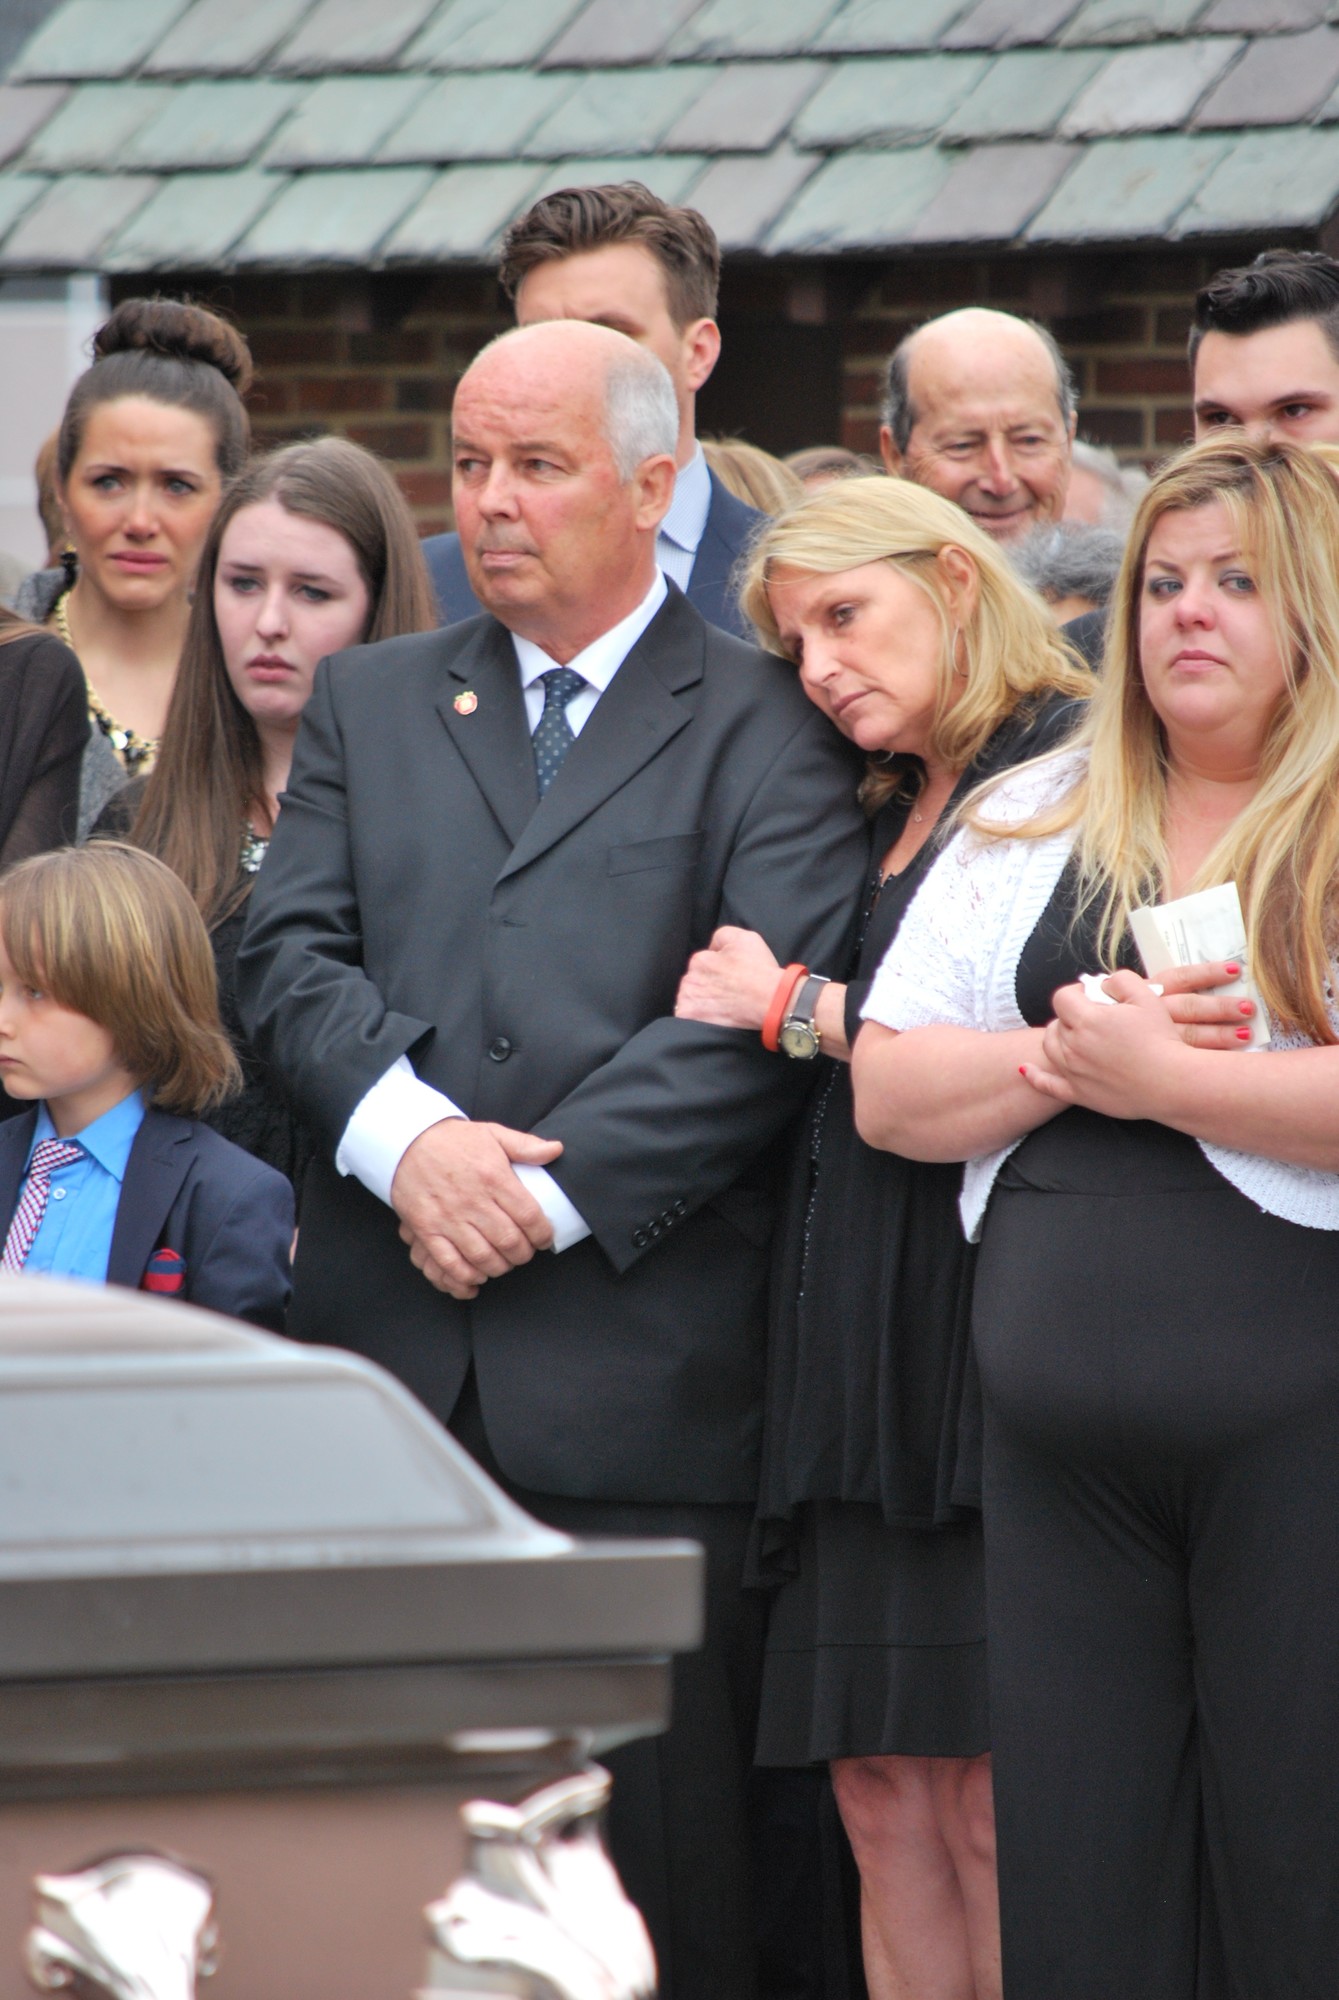 Dan’s son, Daniel and his wife, at the funeral.